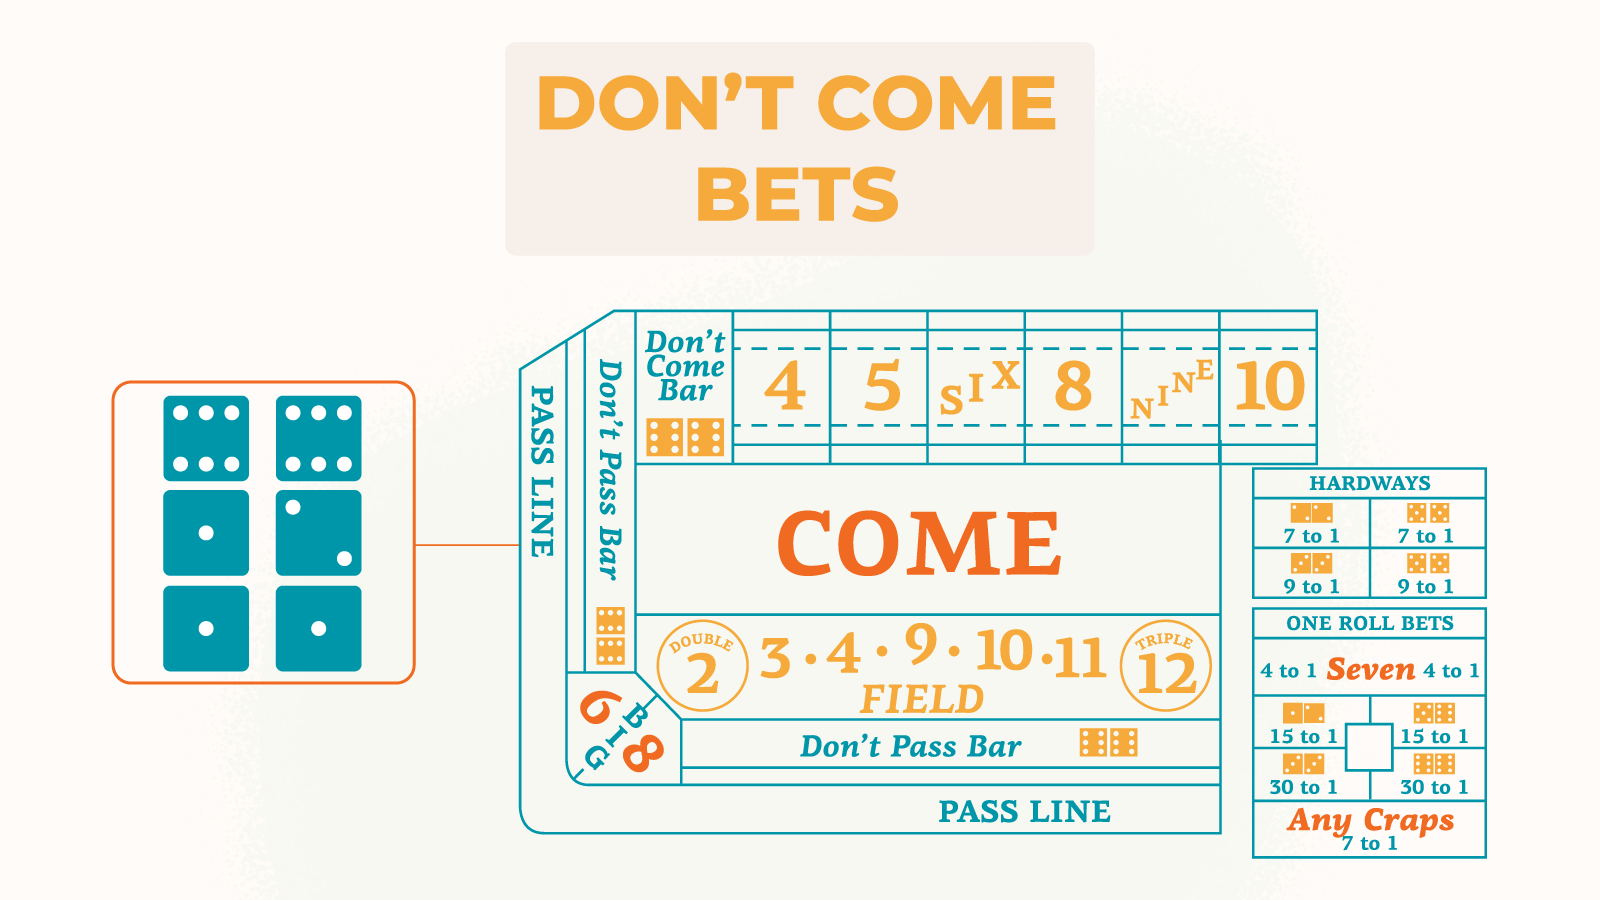 Don't come bets